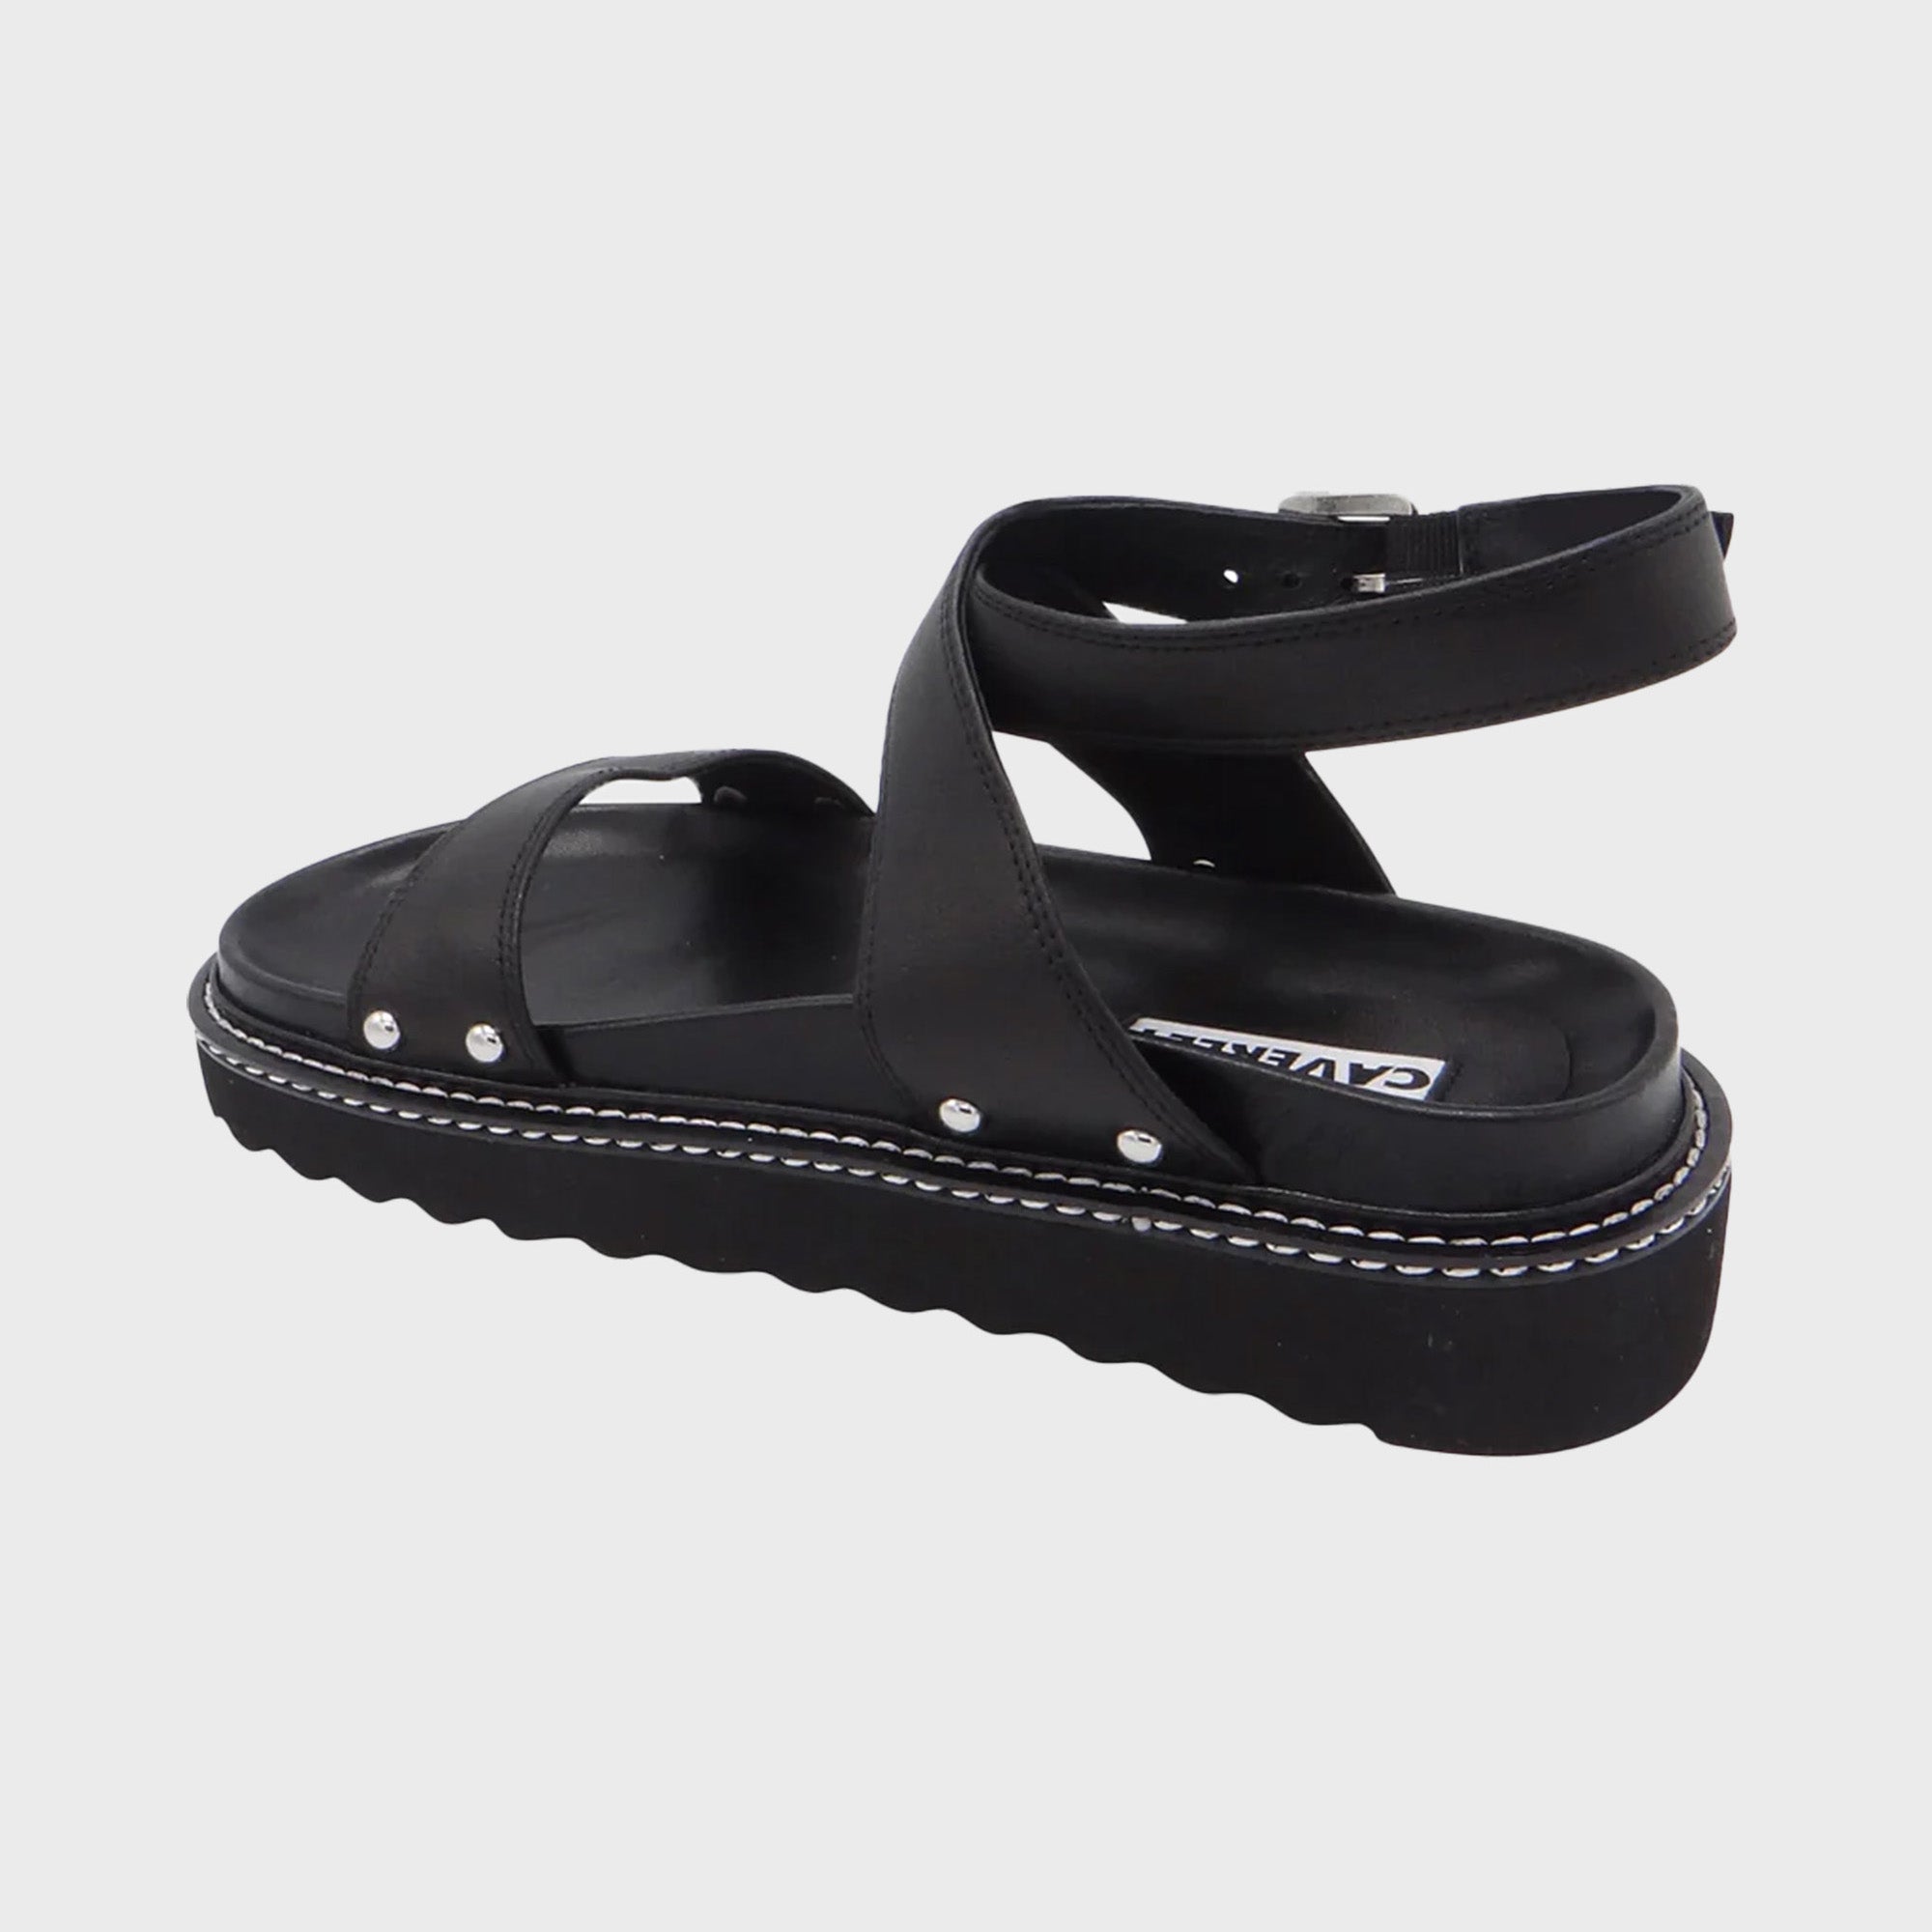 CAVERLEY Earnie Sandal in Black 23S520C Black FROM EIGHTYWINGOLD - OFFICIAL BRAND PARTNER